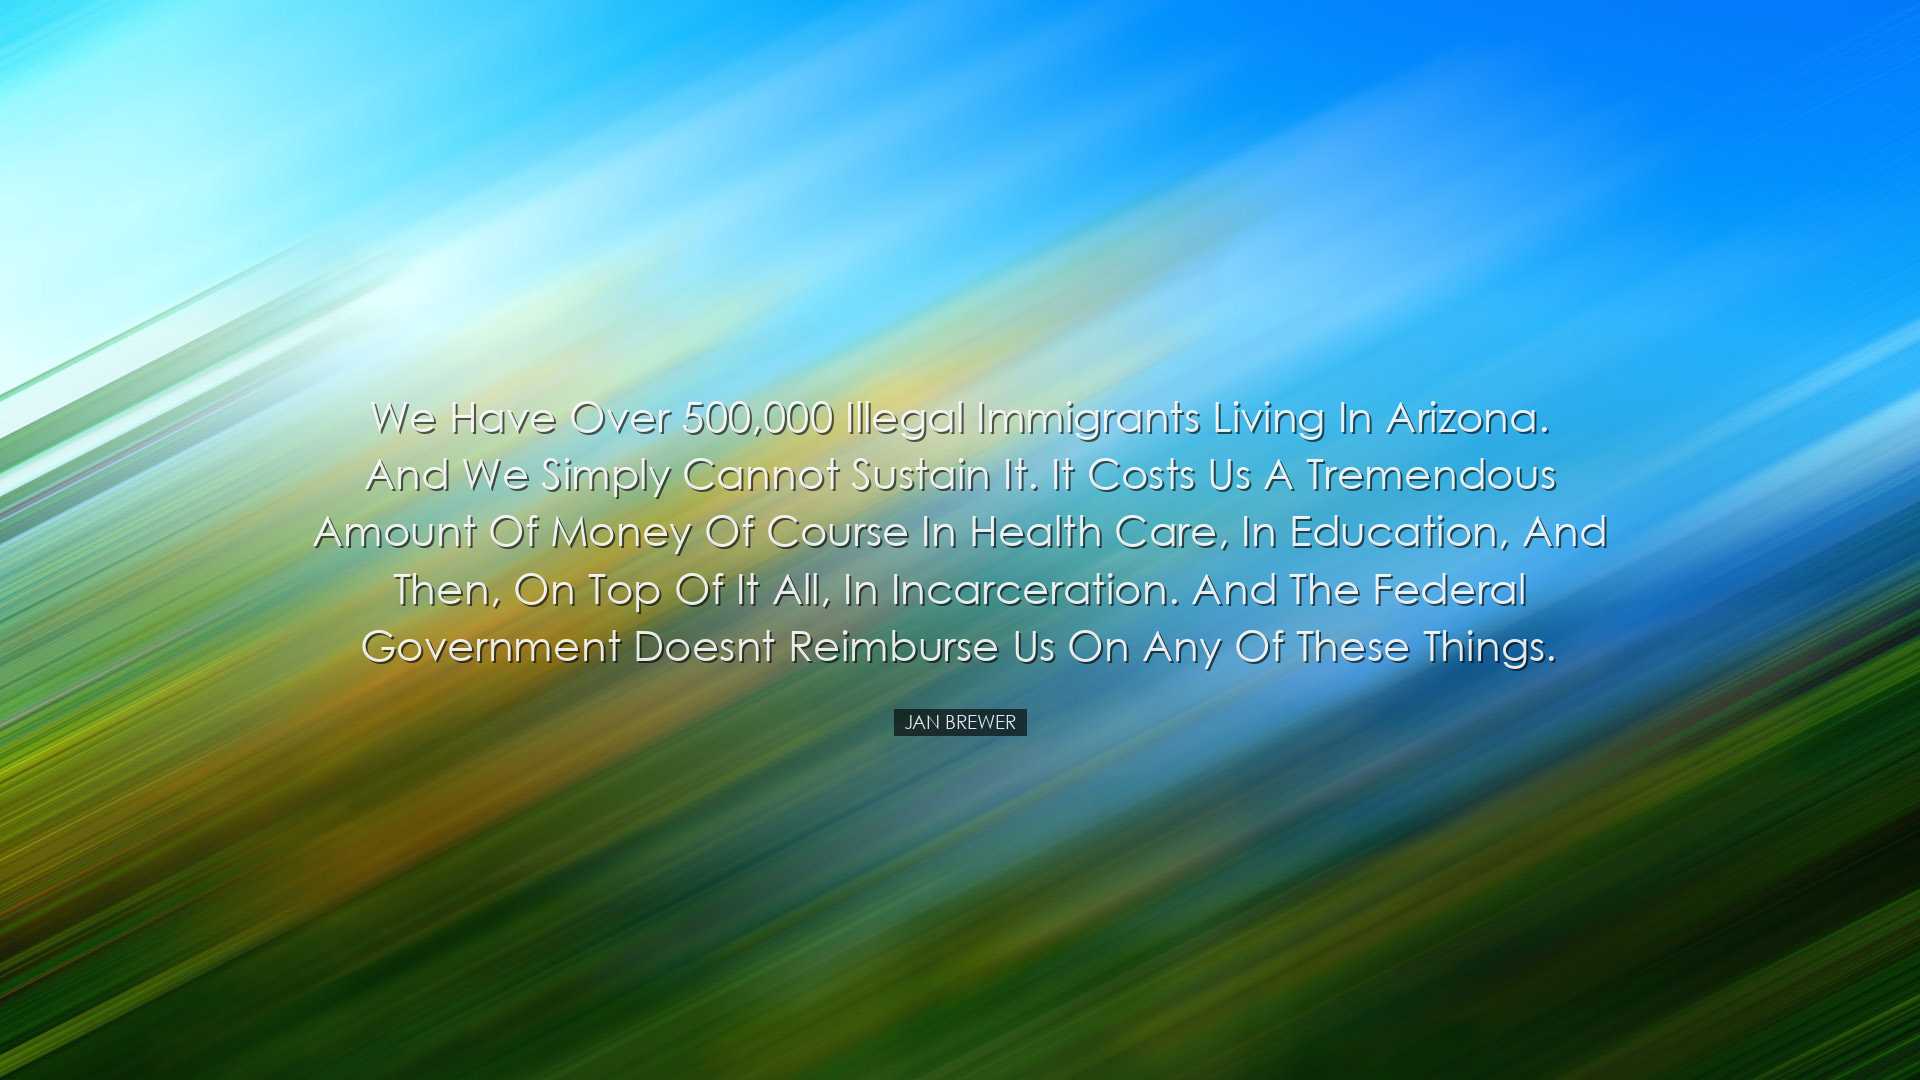 We have over 500,000 illegal immigrants living in Arizona. And we